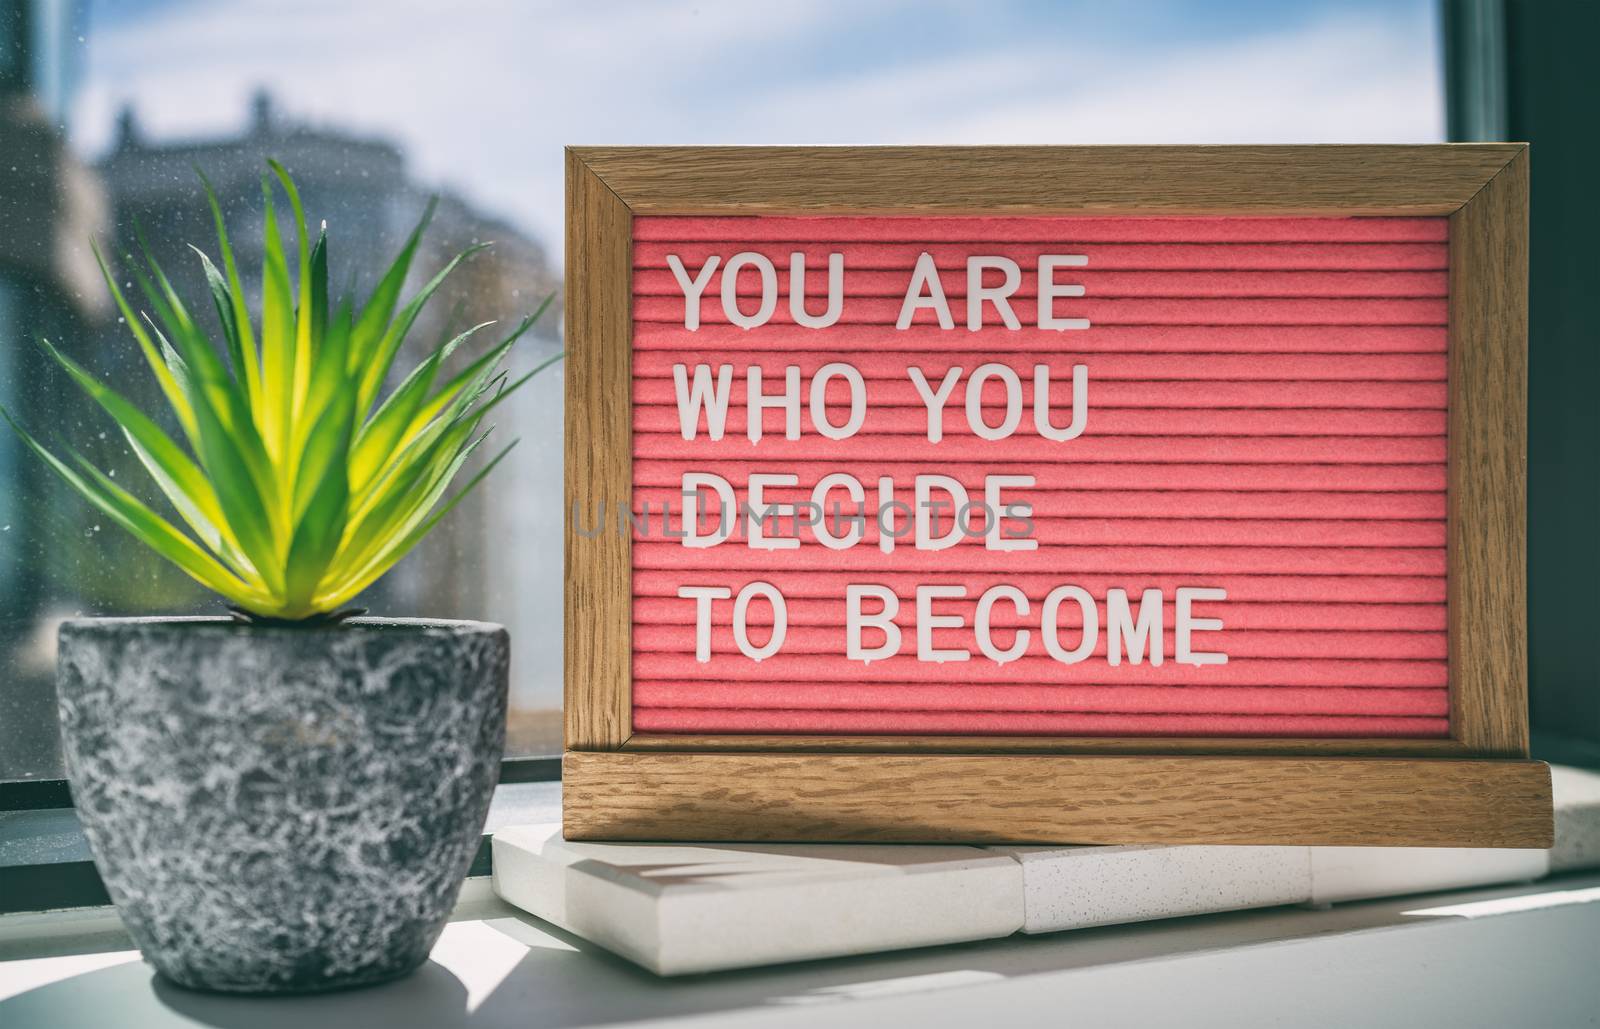 Inspiration quote message sign saying You are who you decide to become - life advice for self esteem, confidence. Home background by Maridav